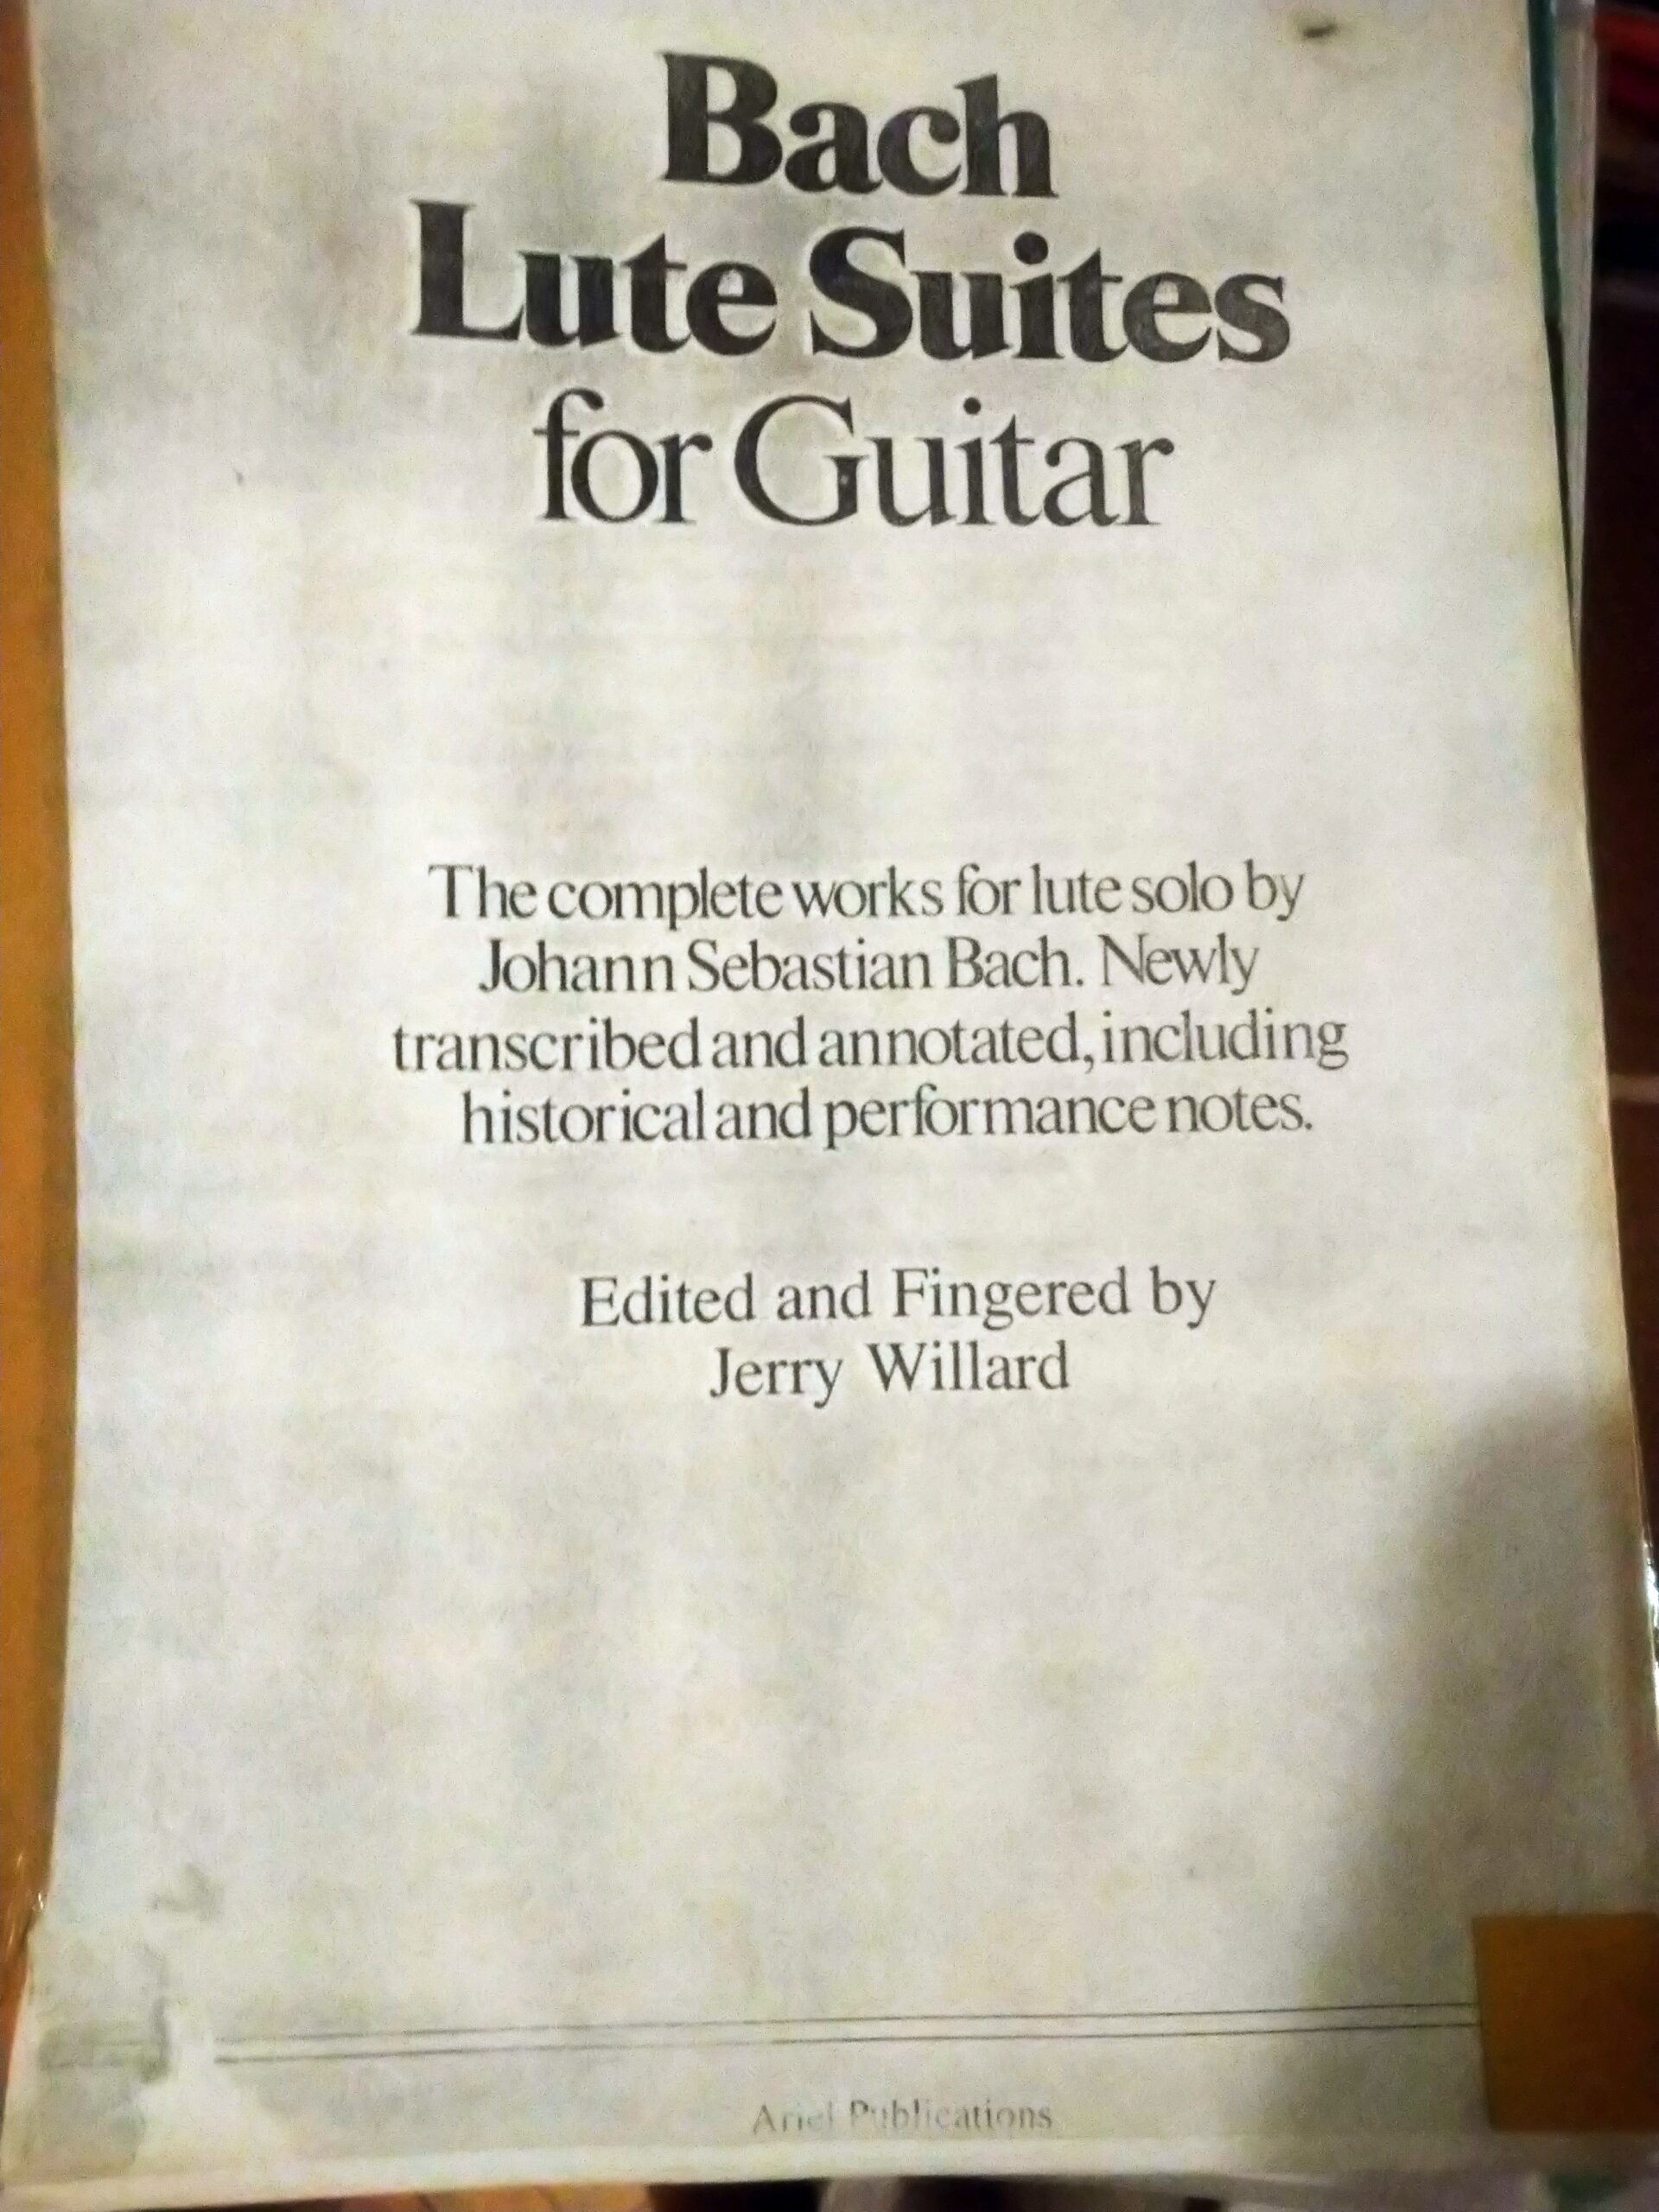 Bach Lute Suites for guitar -Jerry Willard